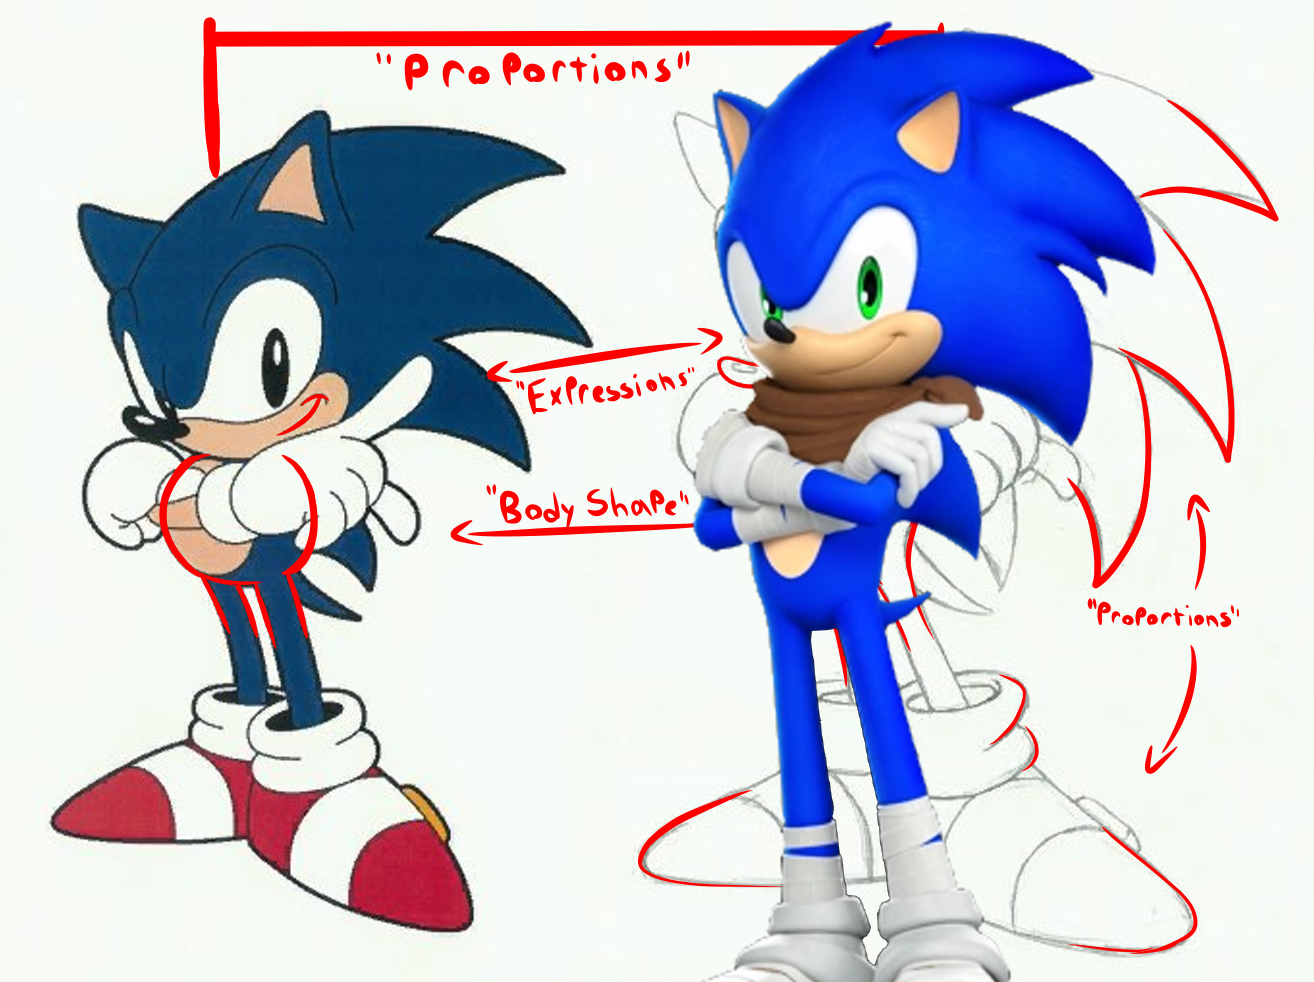 Classic and Modern - More than just a Stylistic Choice - Games - Sonic  Stadium